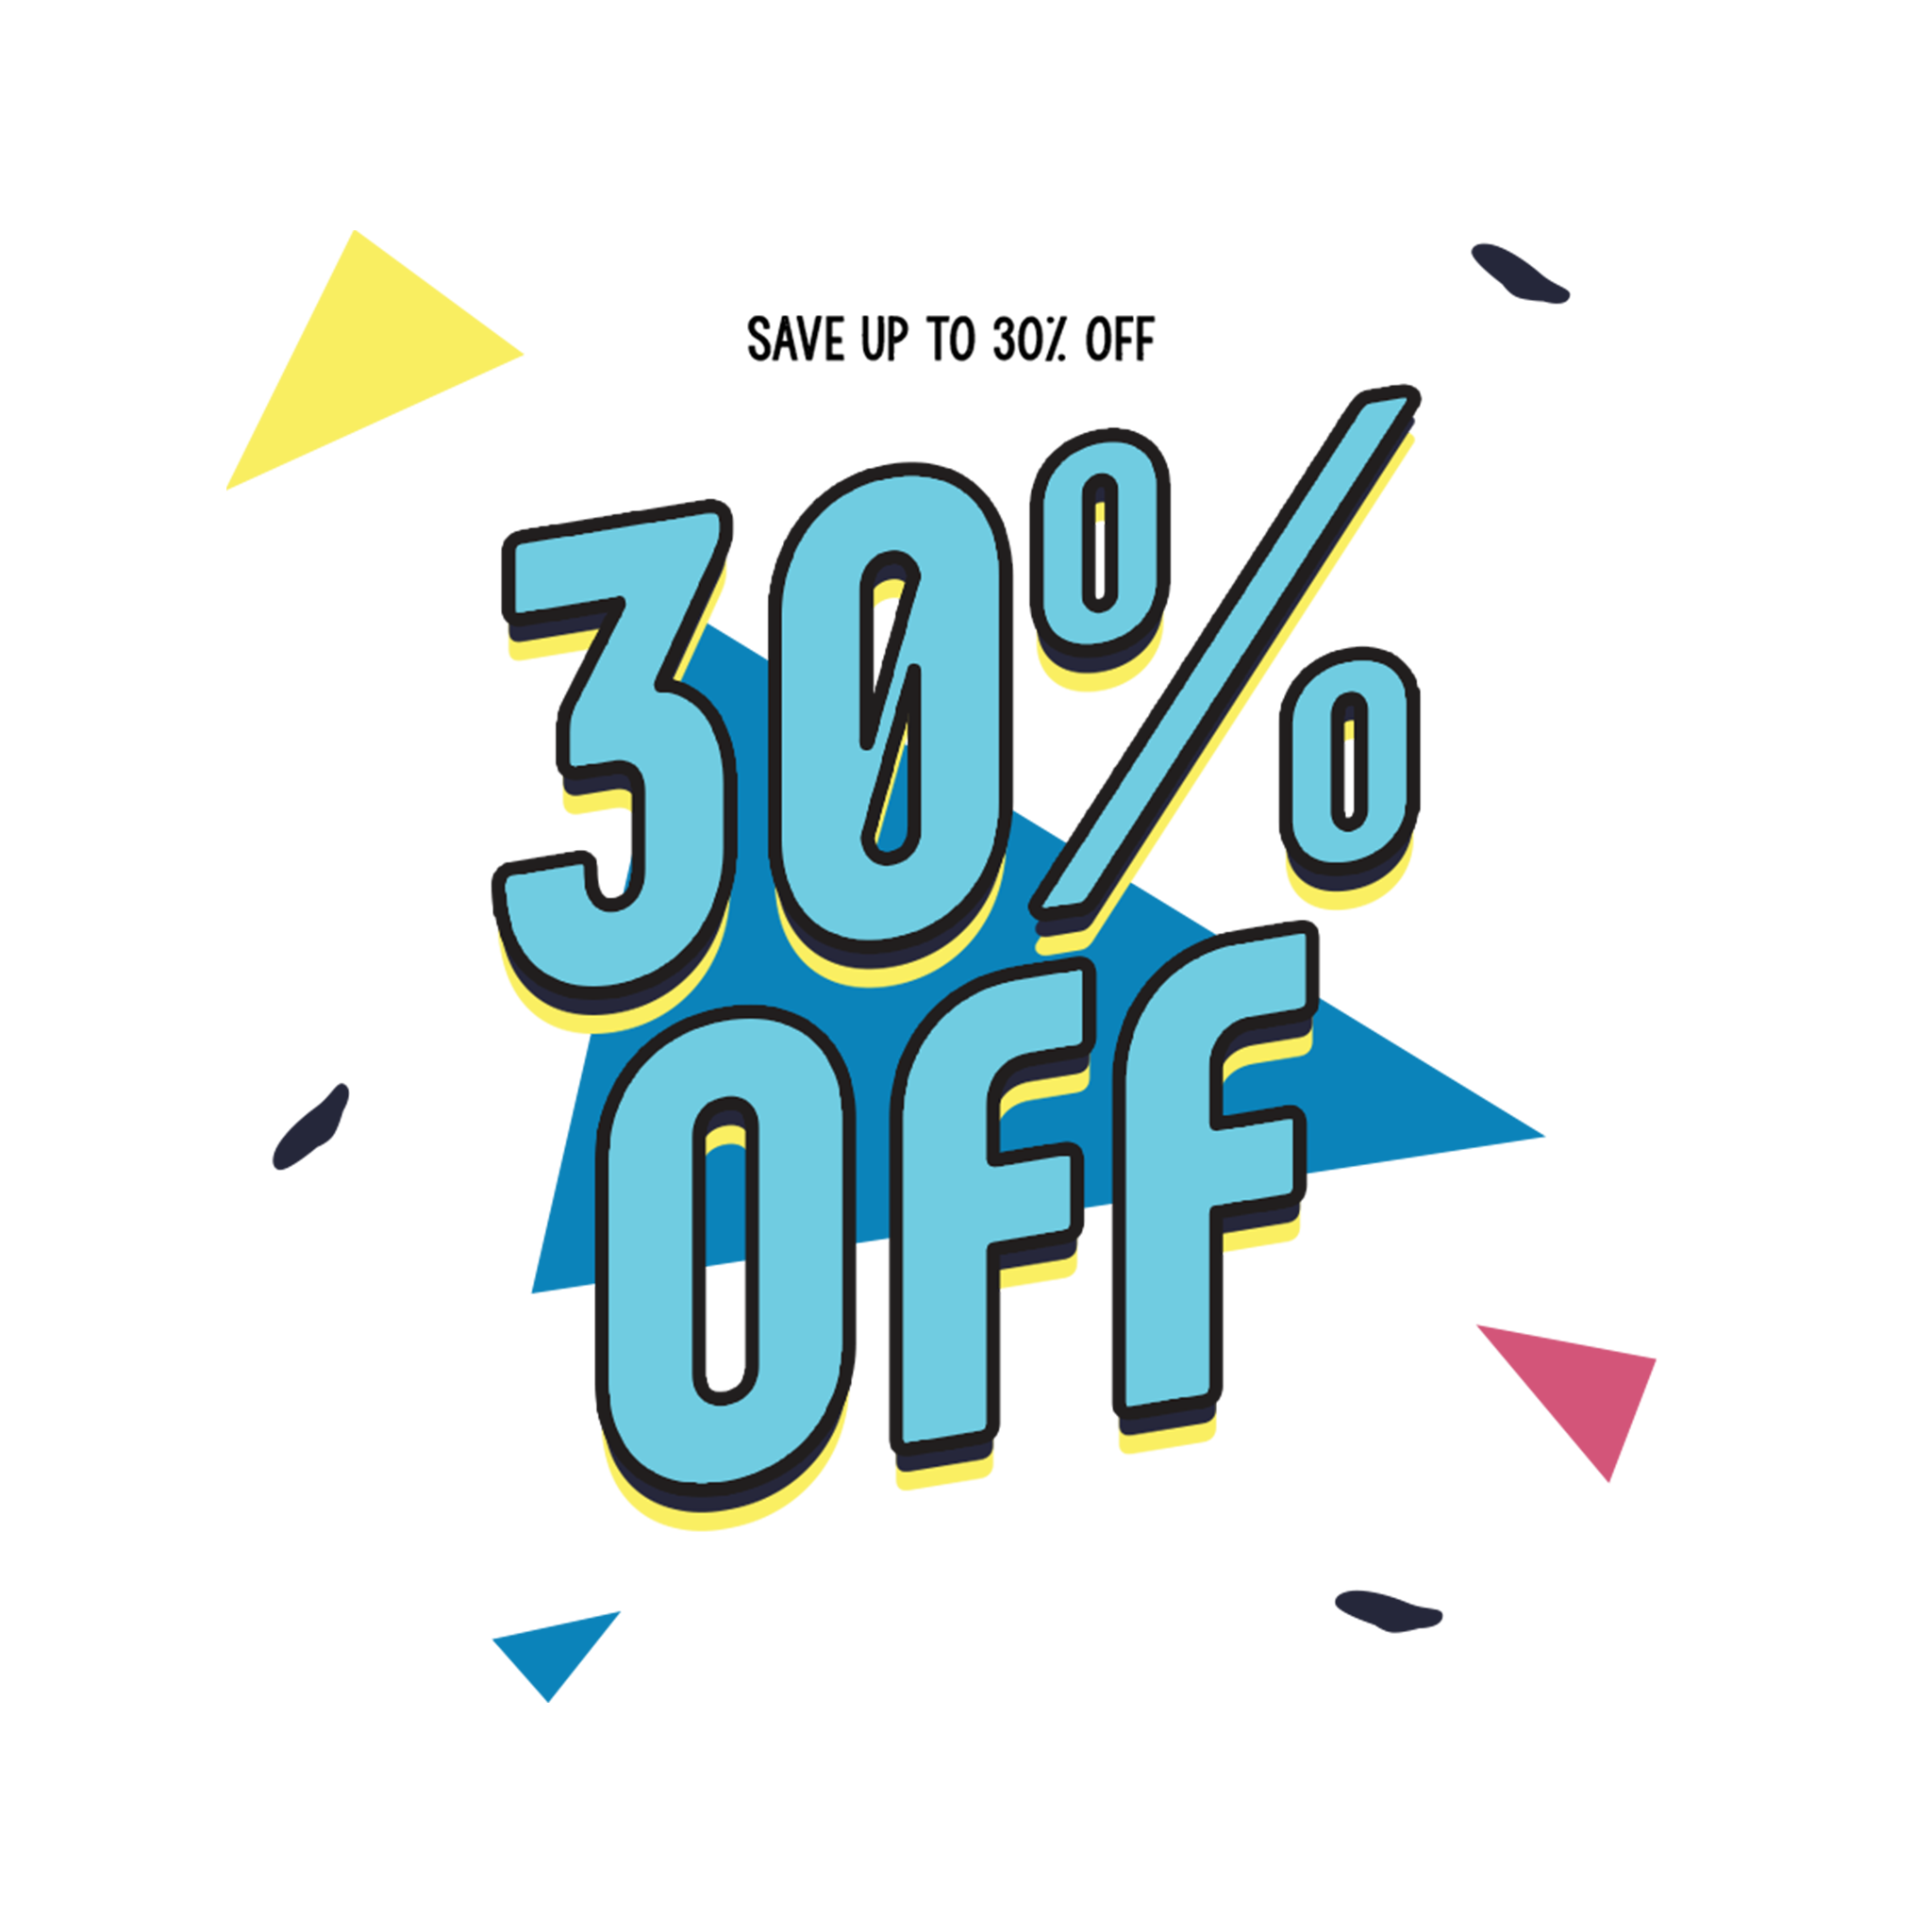 30% Off PNG HD